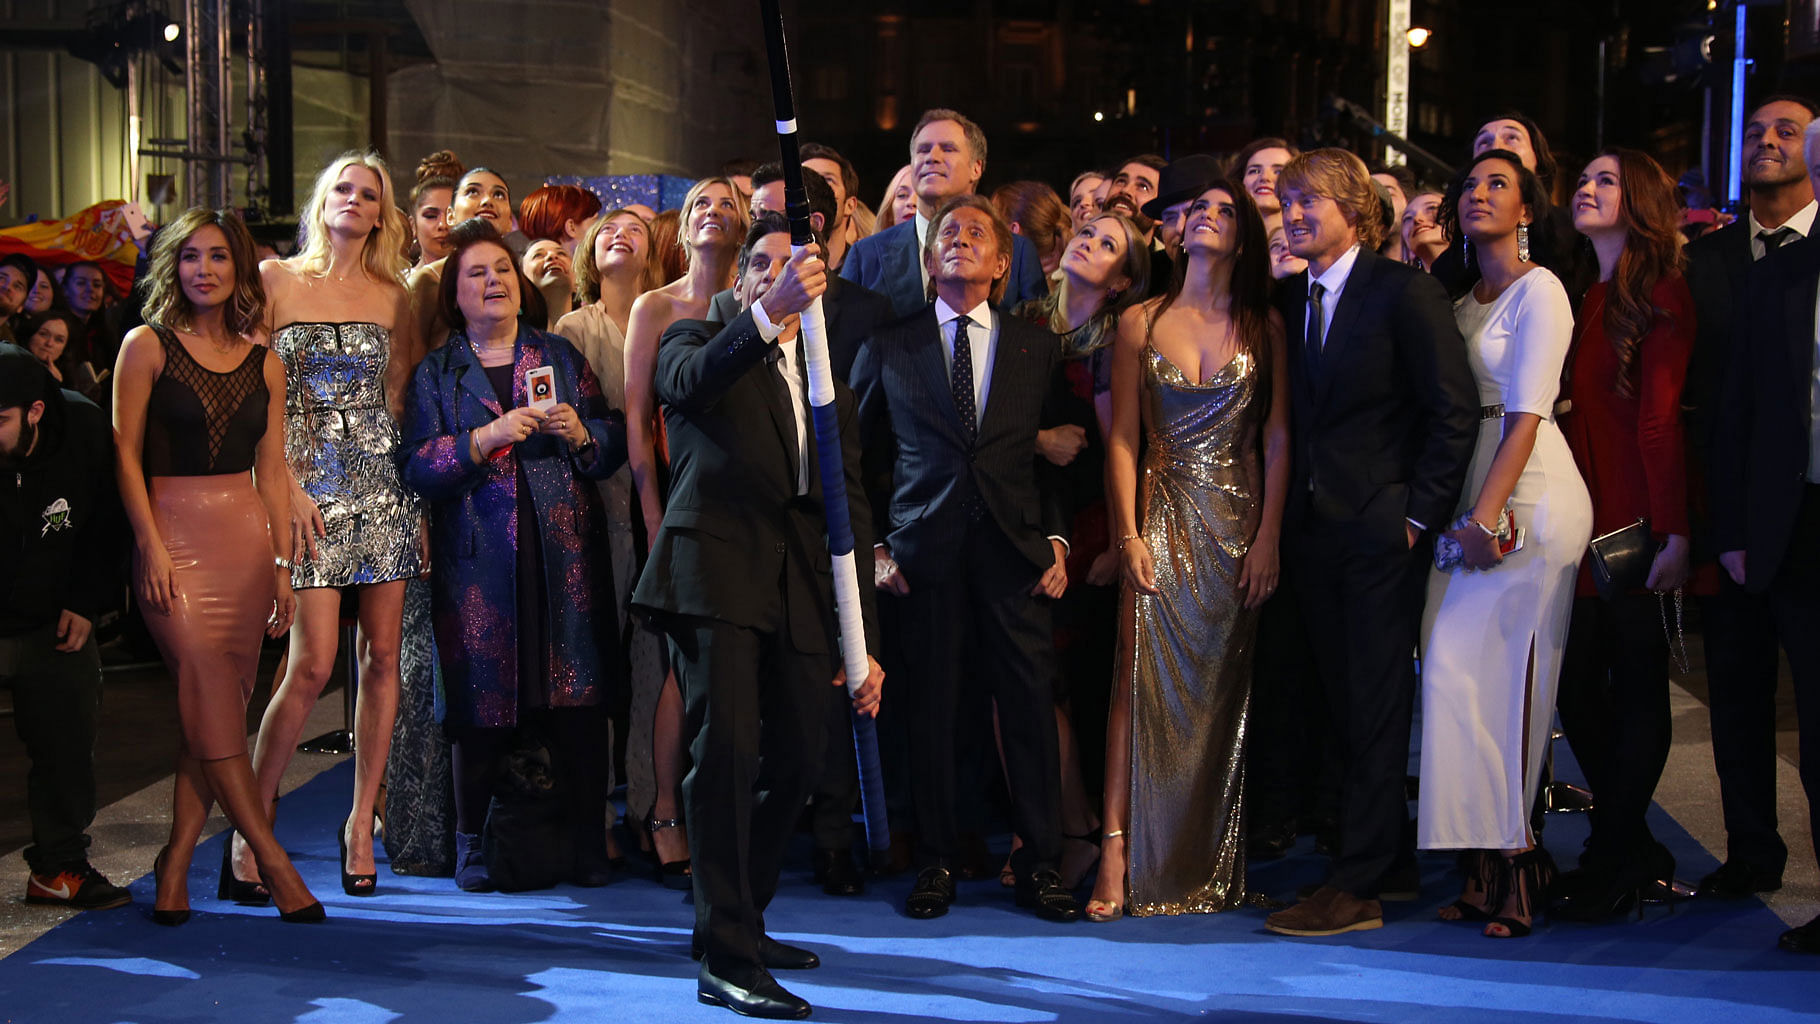 Actor Ben Stiller, front centre, attempts to take a selfie photograph with the World’s largest selfie stick upon arrival at the premiere of the film <i>Zoolander No.2 </i>in London. (Photo: AP)